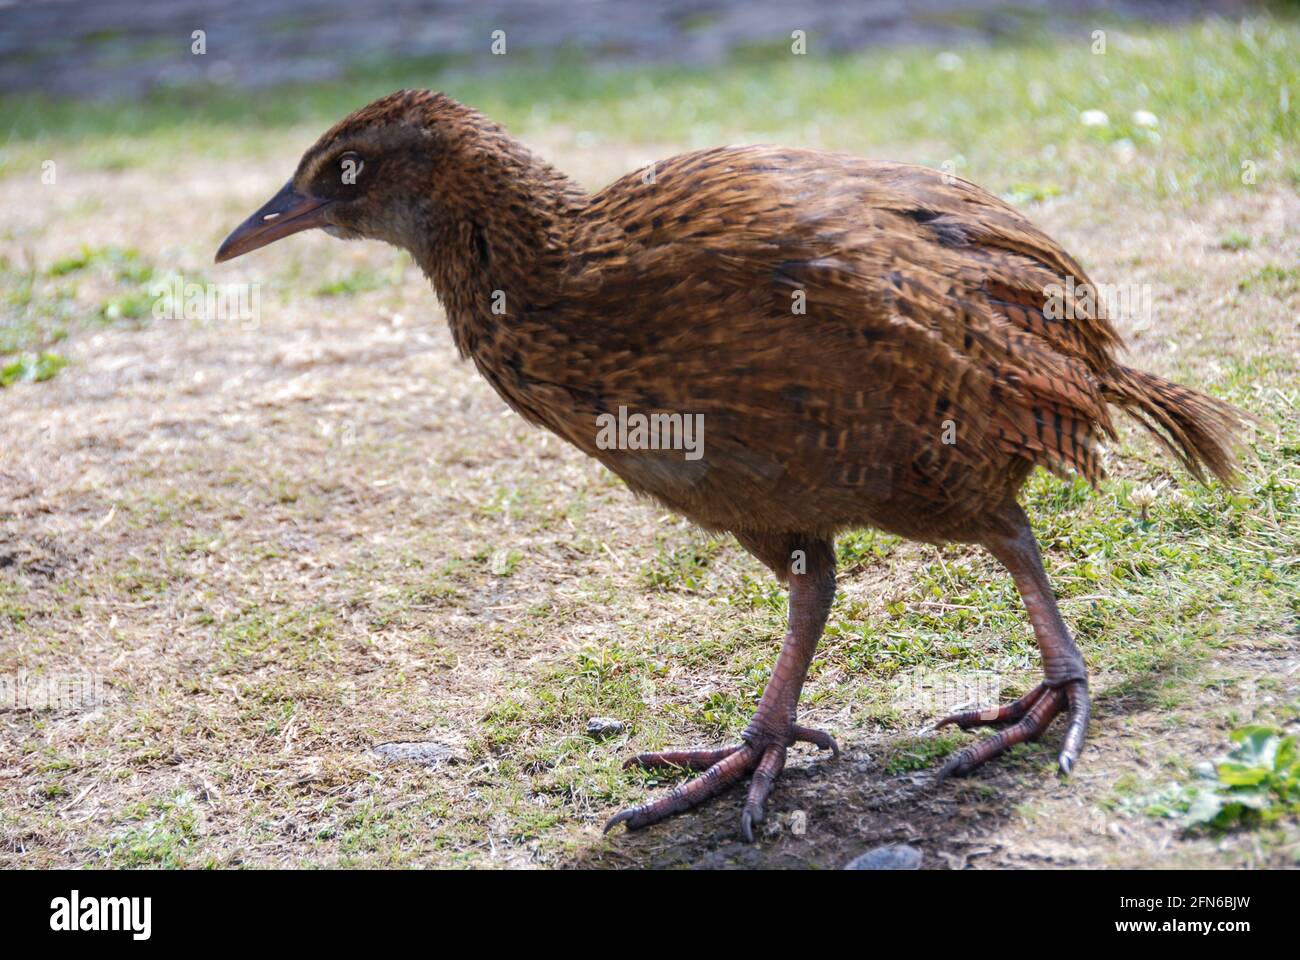 Encounter at the parking site: A Weka, one of the flightless, native birds of New Zealand that are threatened by invasive mammals like ferrets and rats. Stock Photo